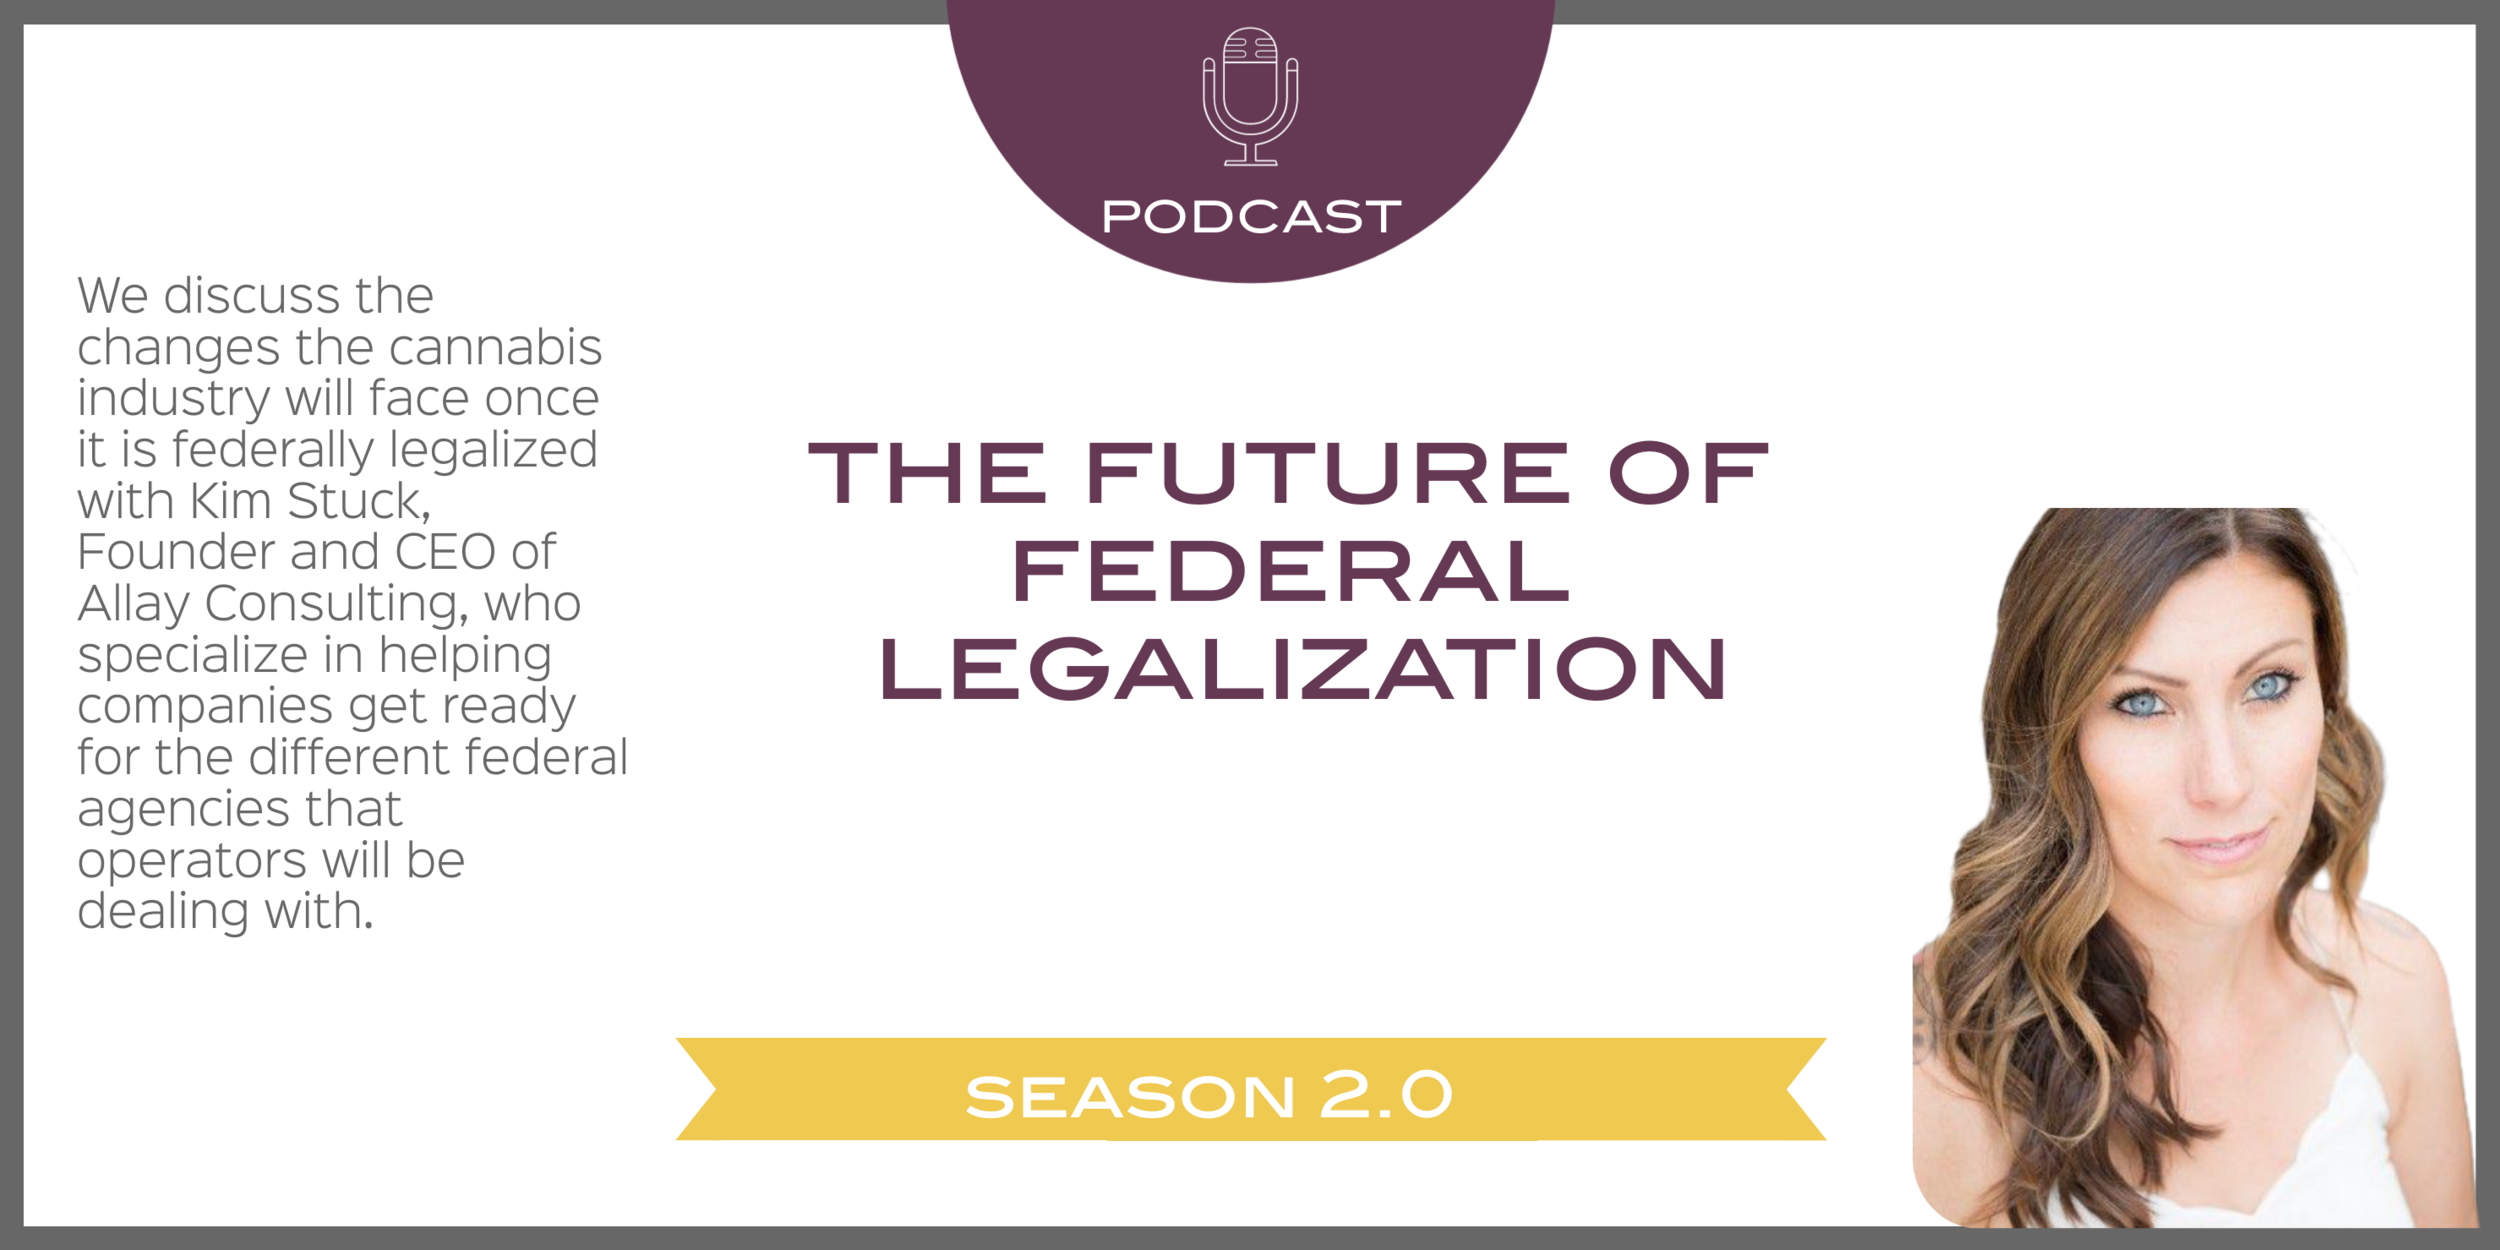 The Future of Federal Legalization is Fast Approaching Feat. Allay Consulting